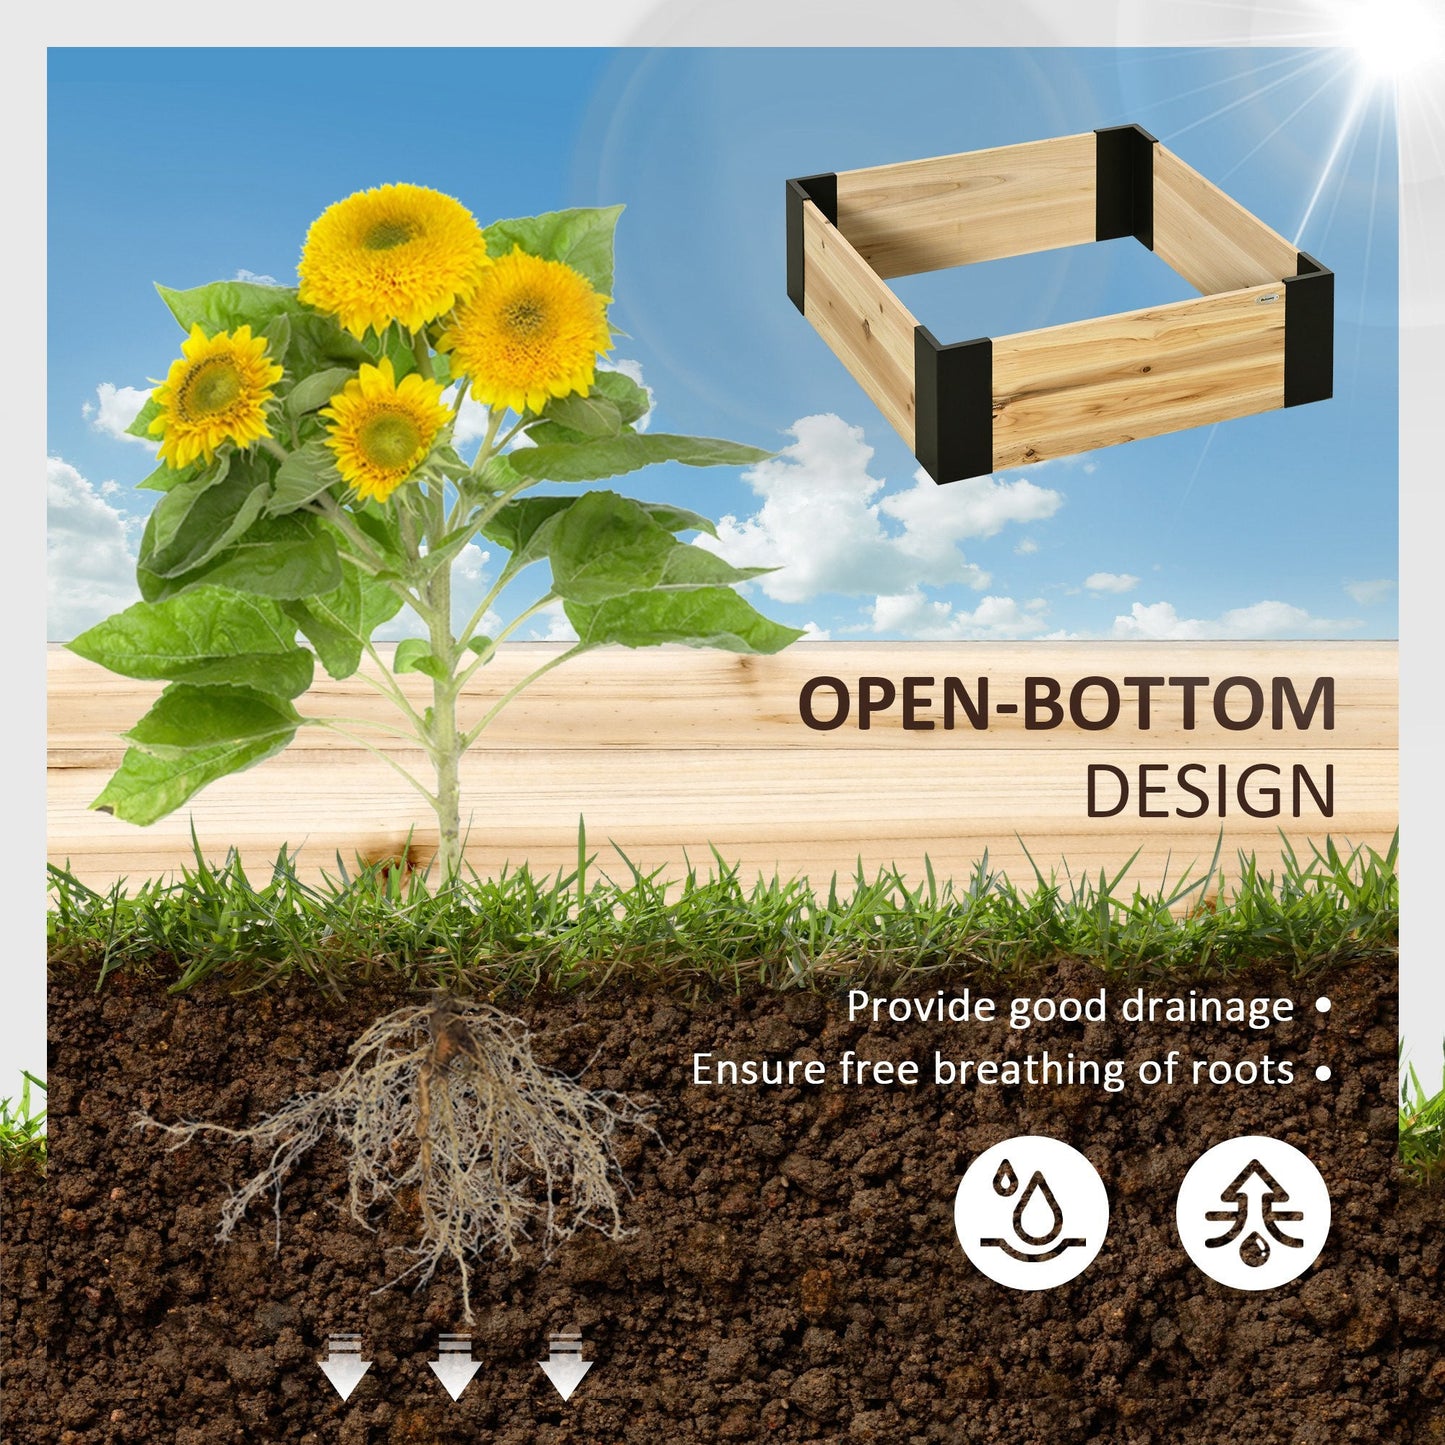 Outdoor and Garden-31.5" x 31.5" Raised Garden Bed with Metal Corner Bracket, Planter Box for Growing Vegetables, Flowers, Fruits, Herbs, and Succulents - Outdoor Style Company